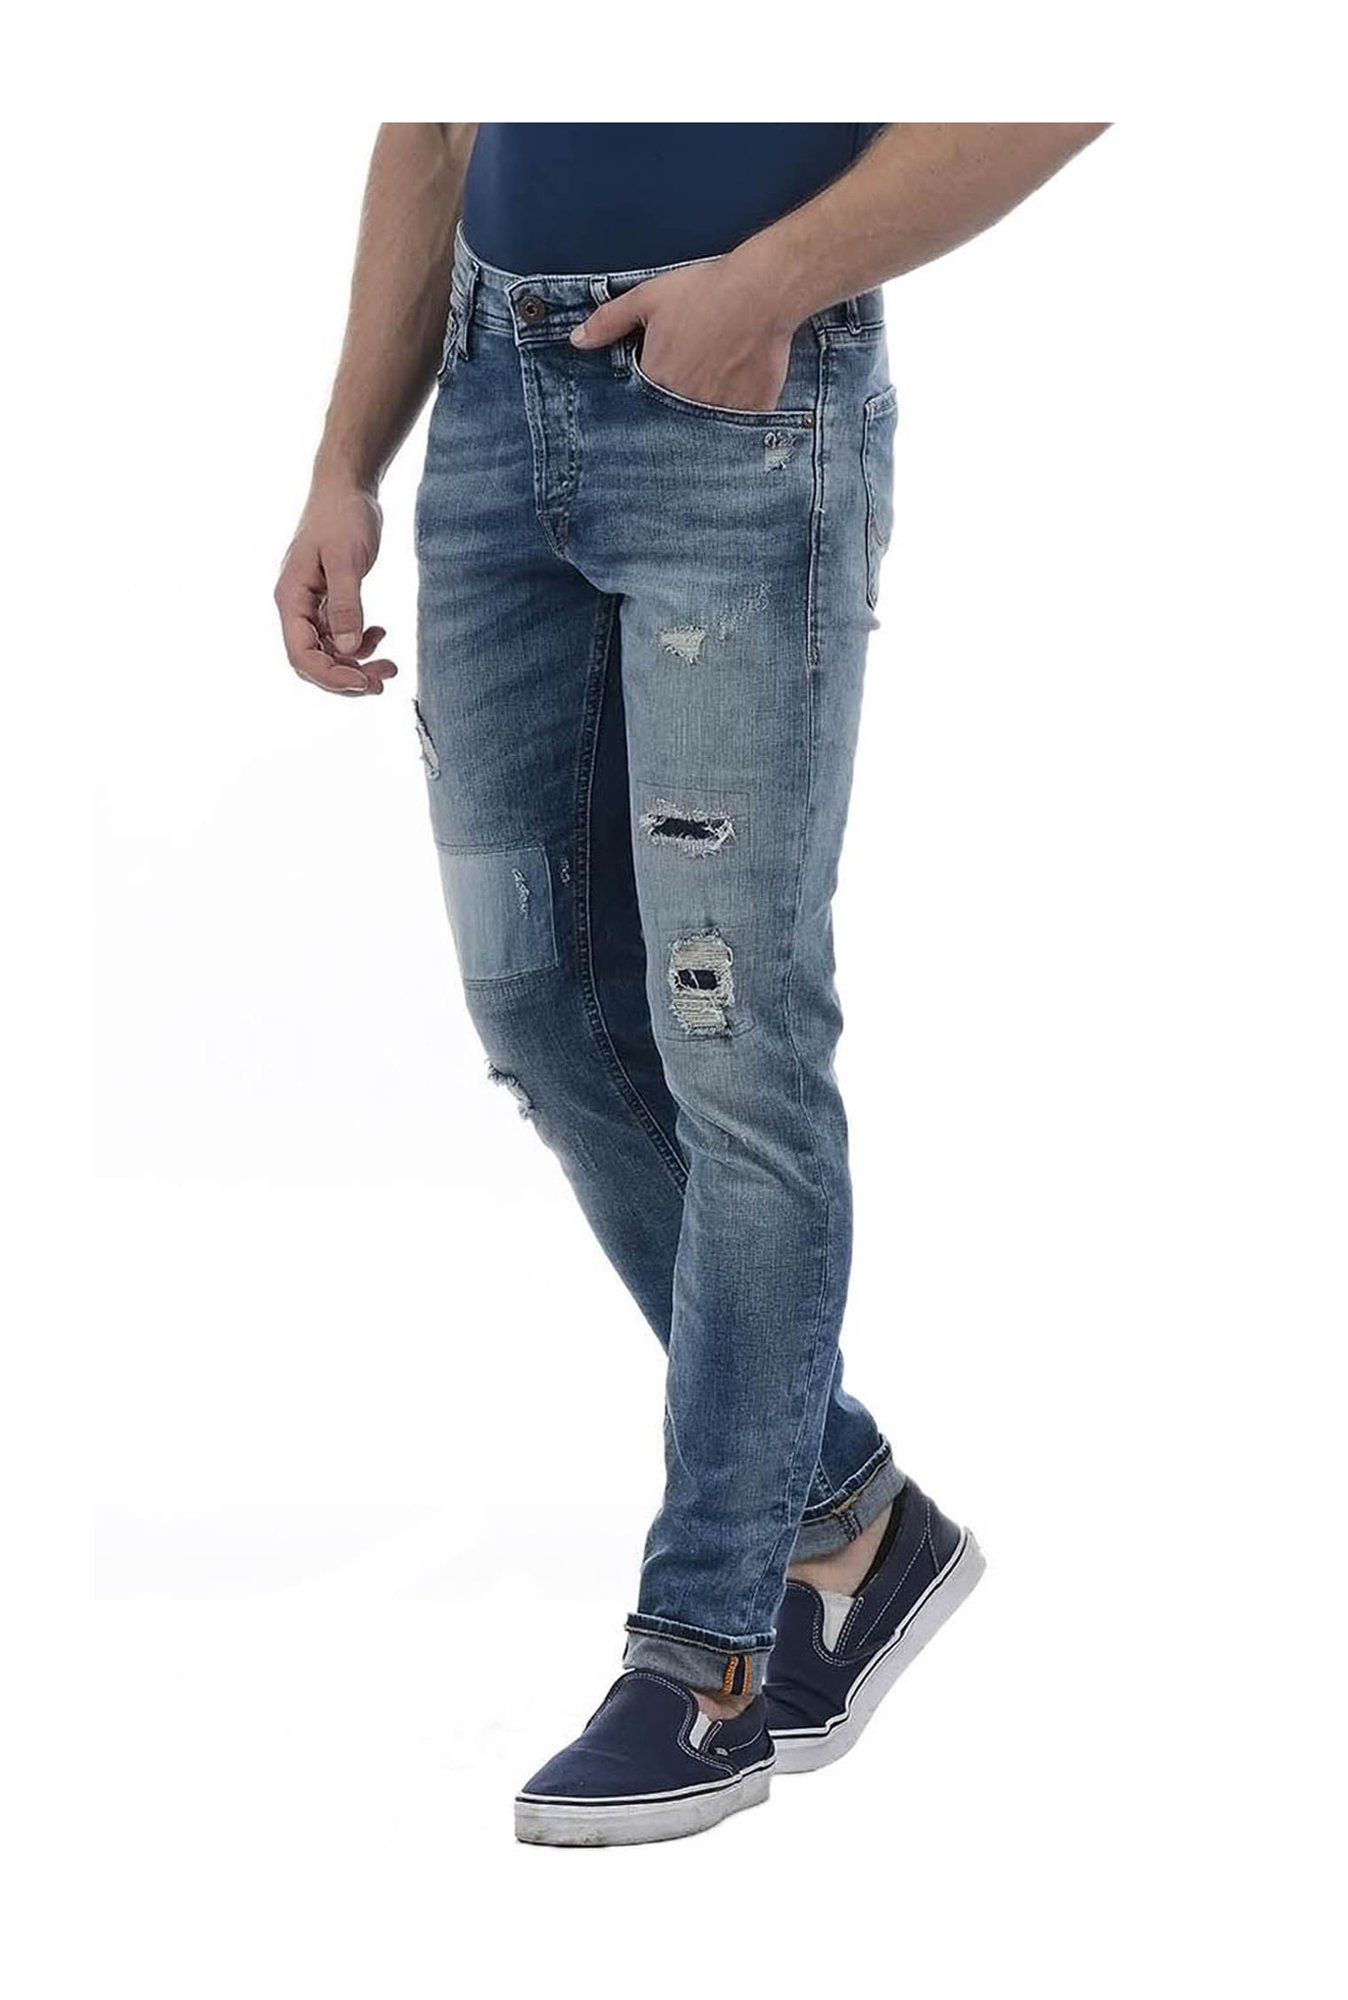 Discover more than 222 jack and jones distressed jeans super hot